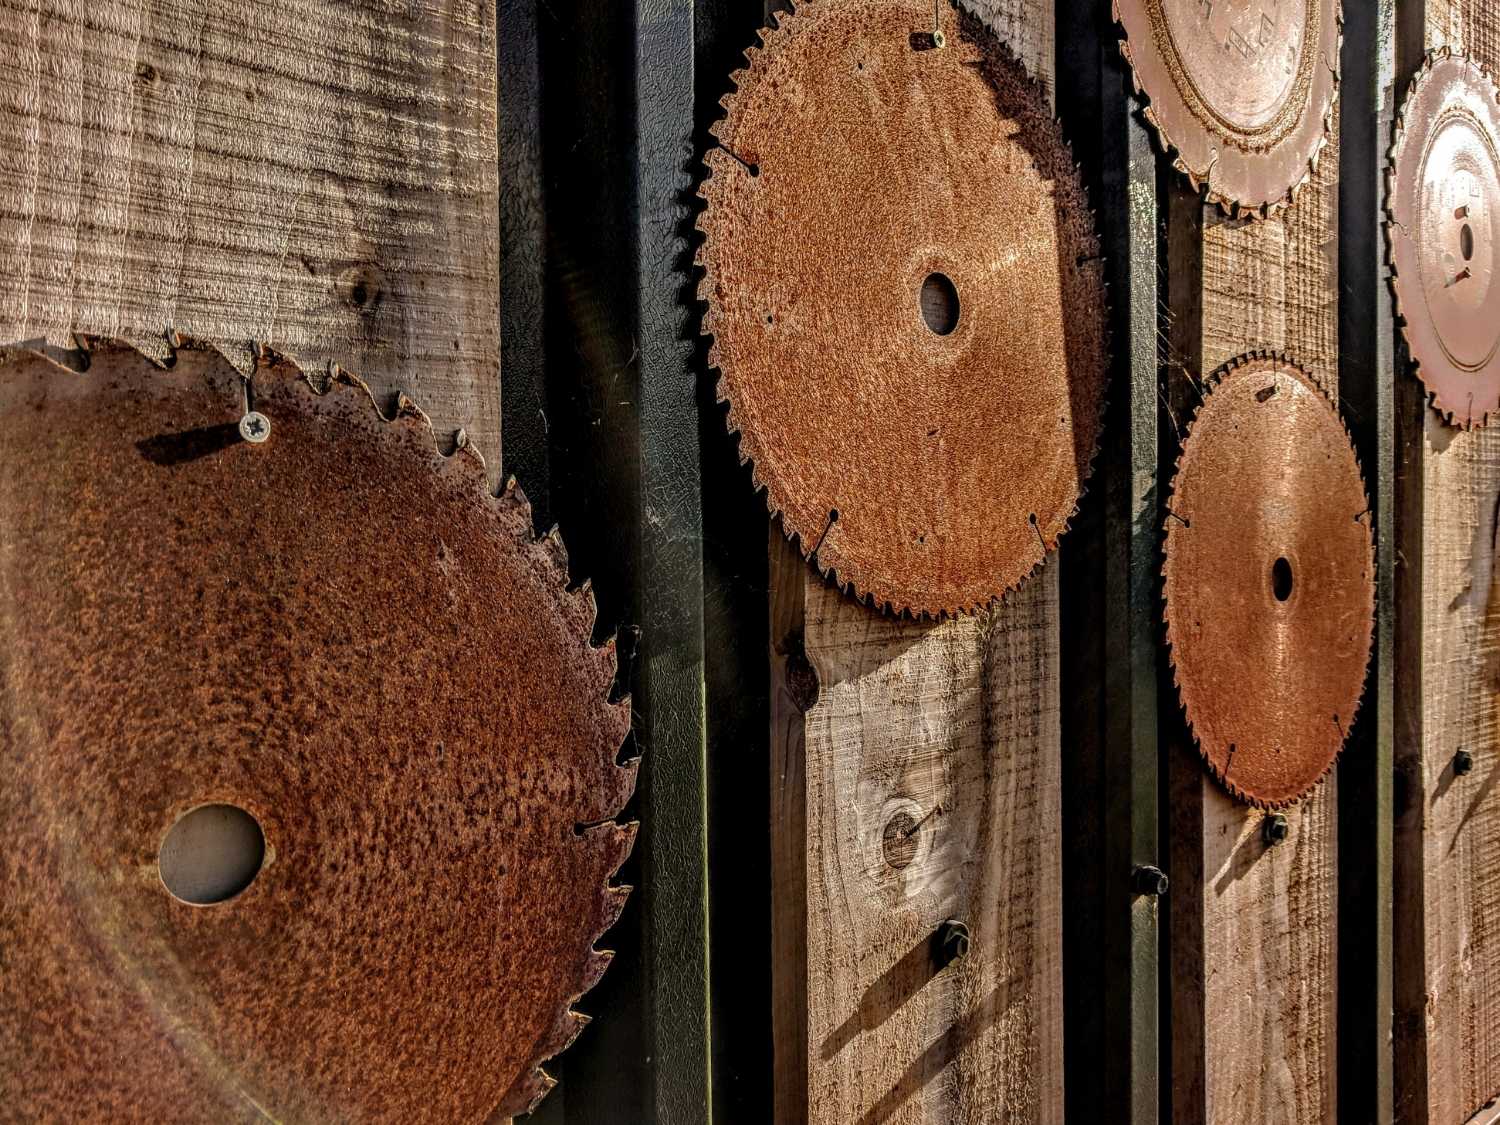 Rustic saw blades on wooden cladding